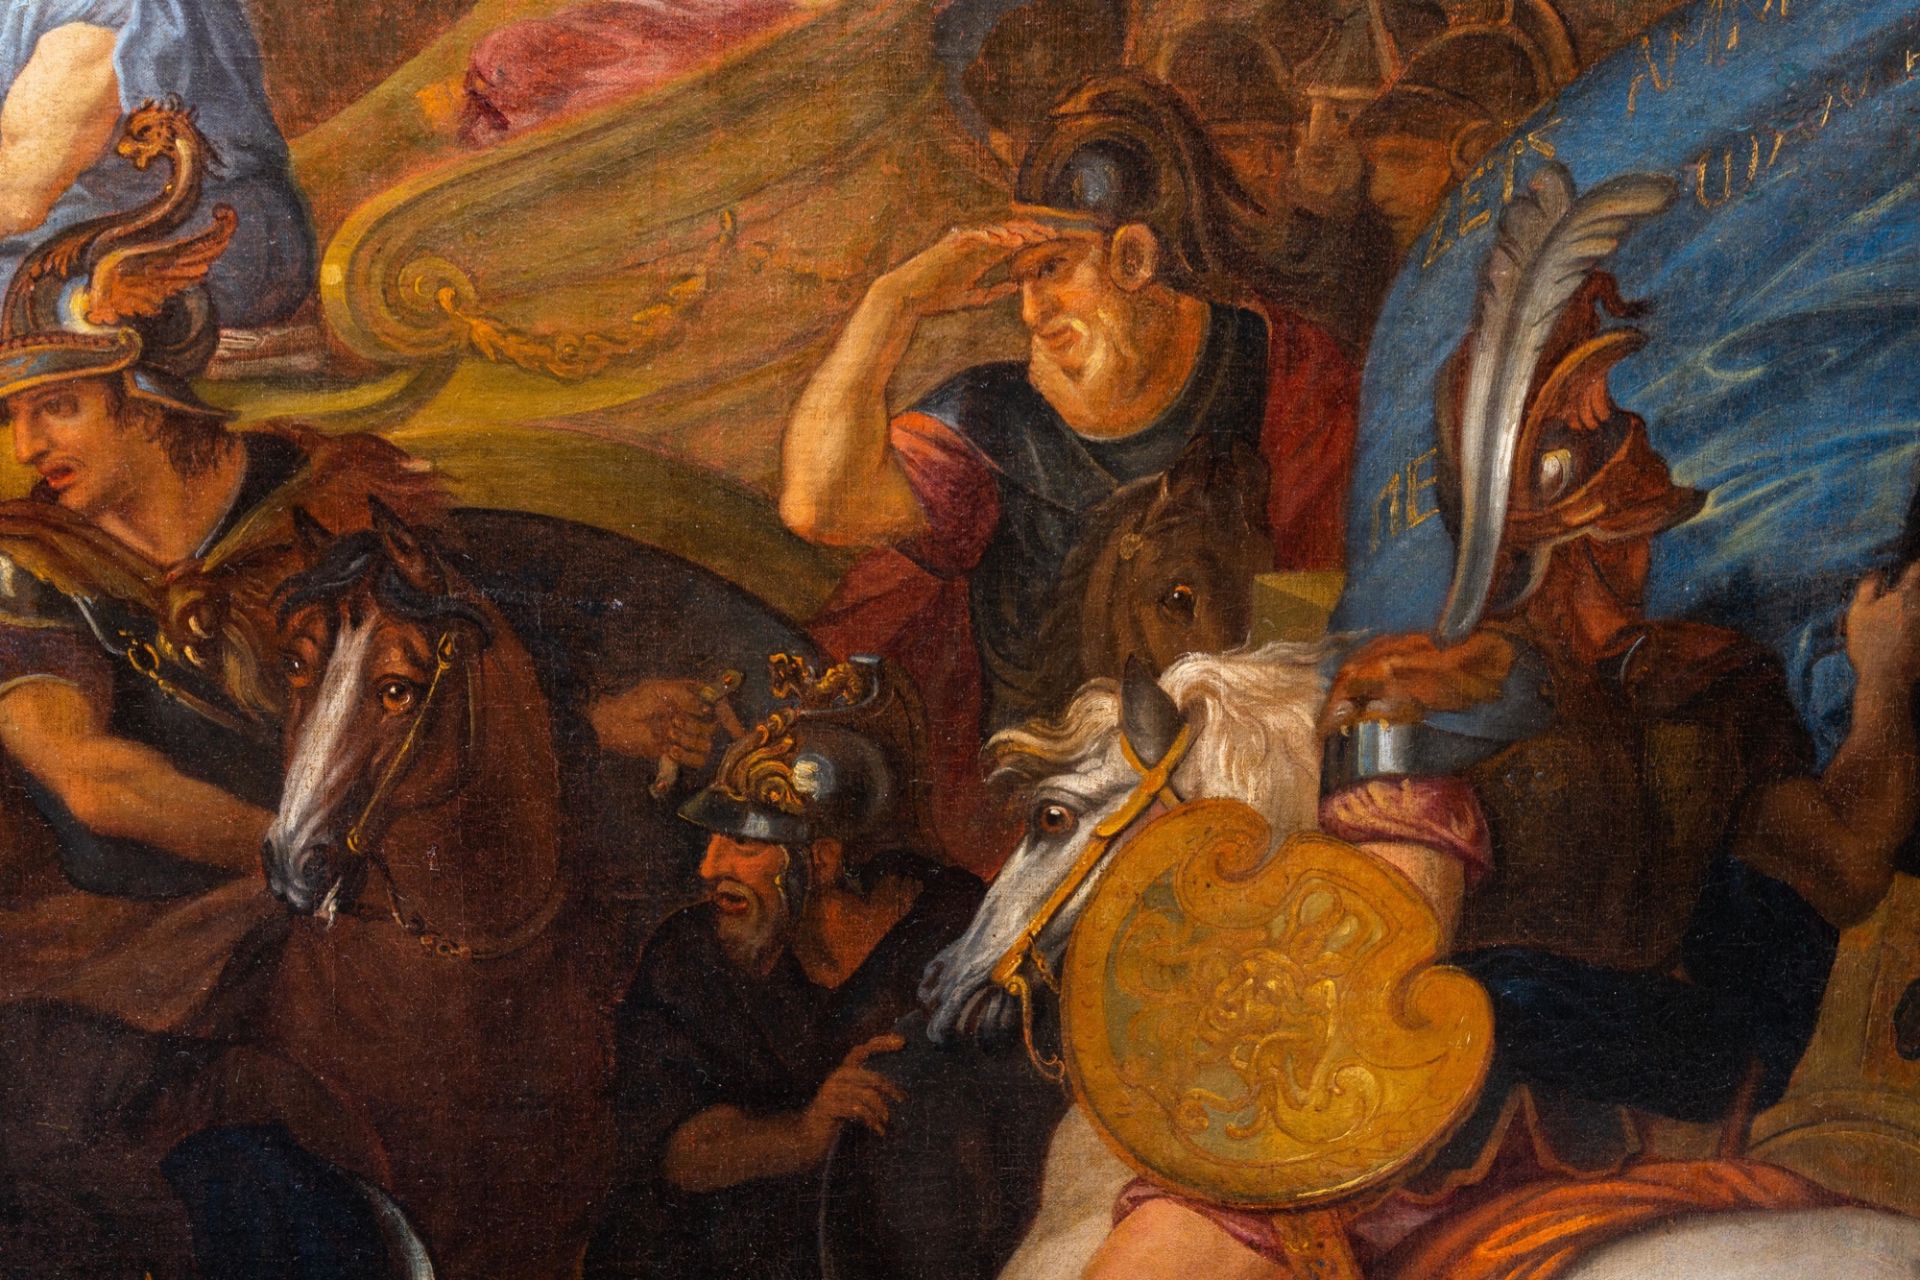 French school, workshop of Charles le Brun (1619-1690): Alexander and Poros in the Battle of Hydaspe - Image 15 of 24